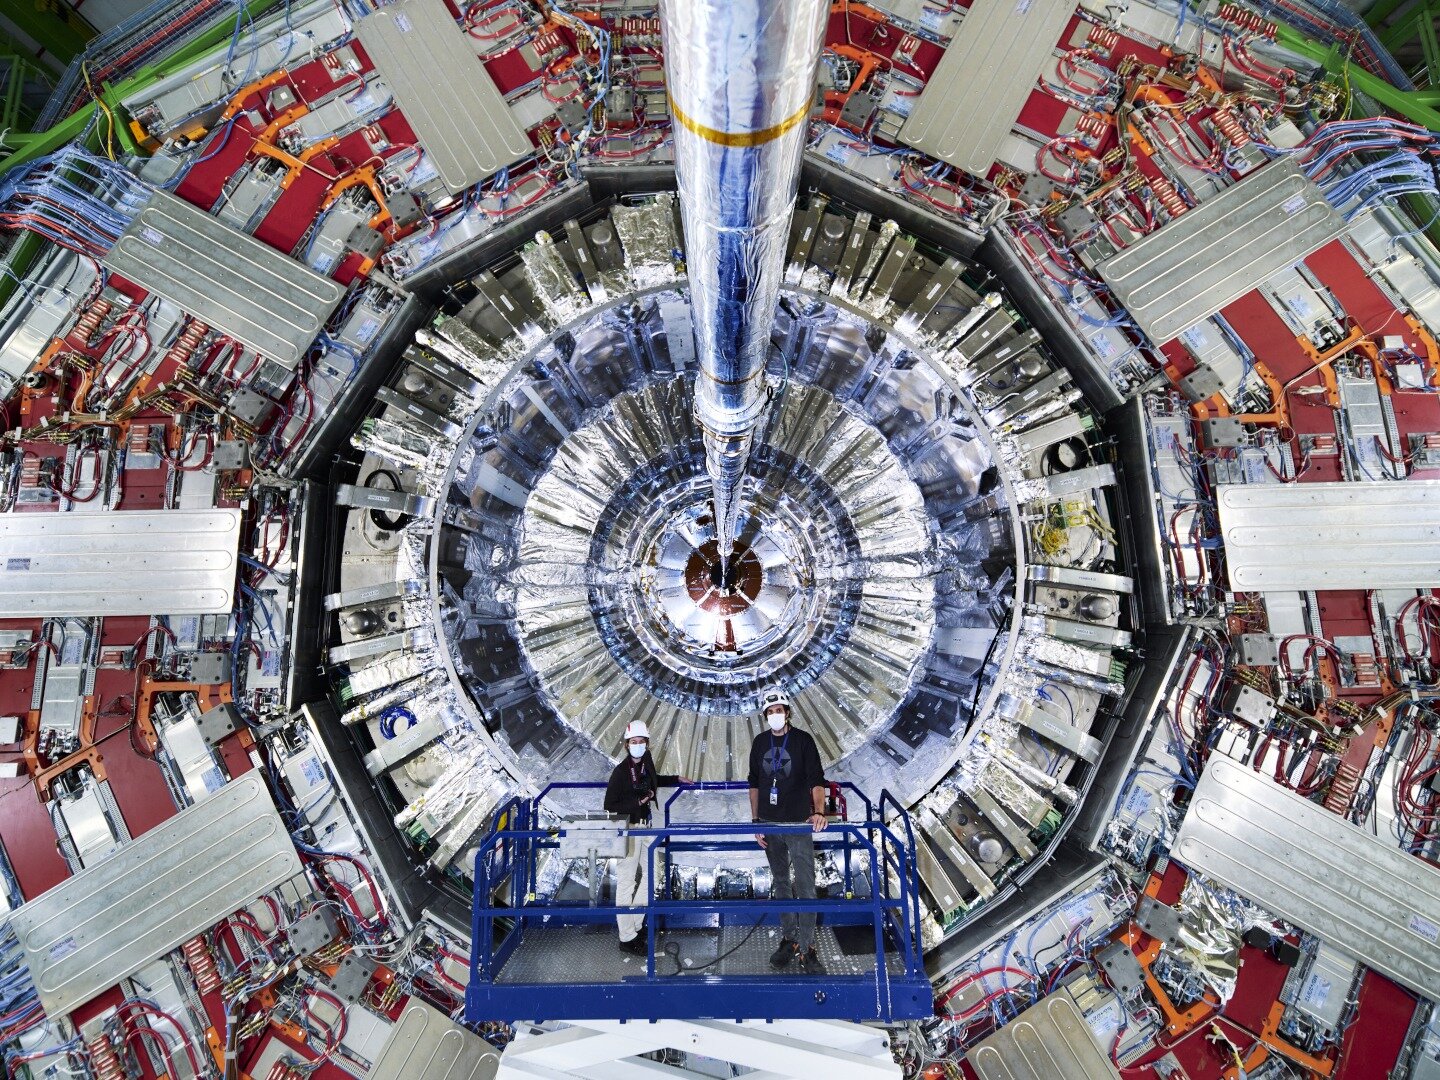 Preparing for a more powerful particle accelerator